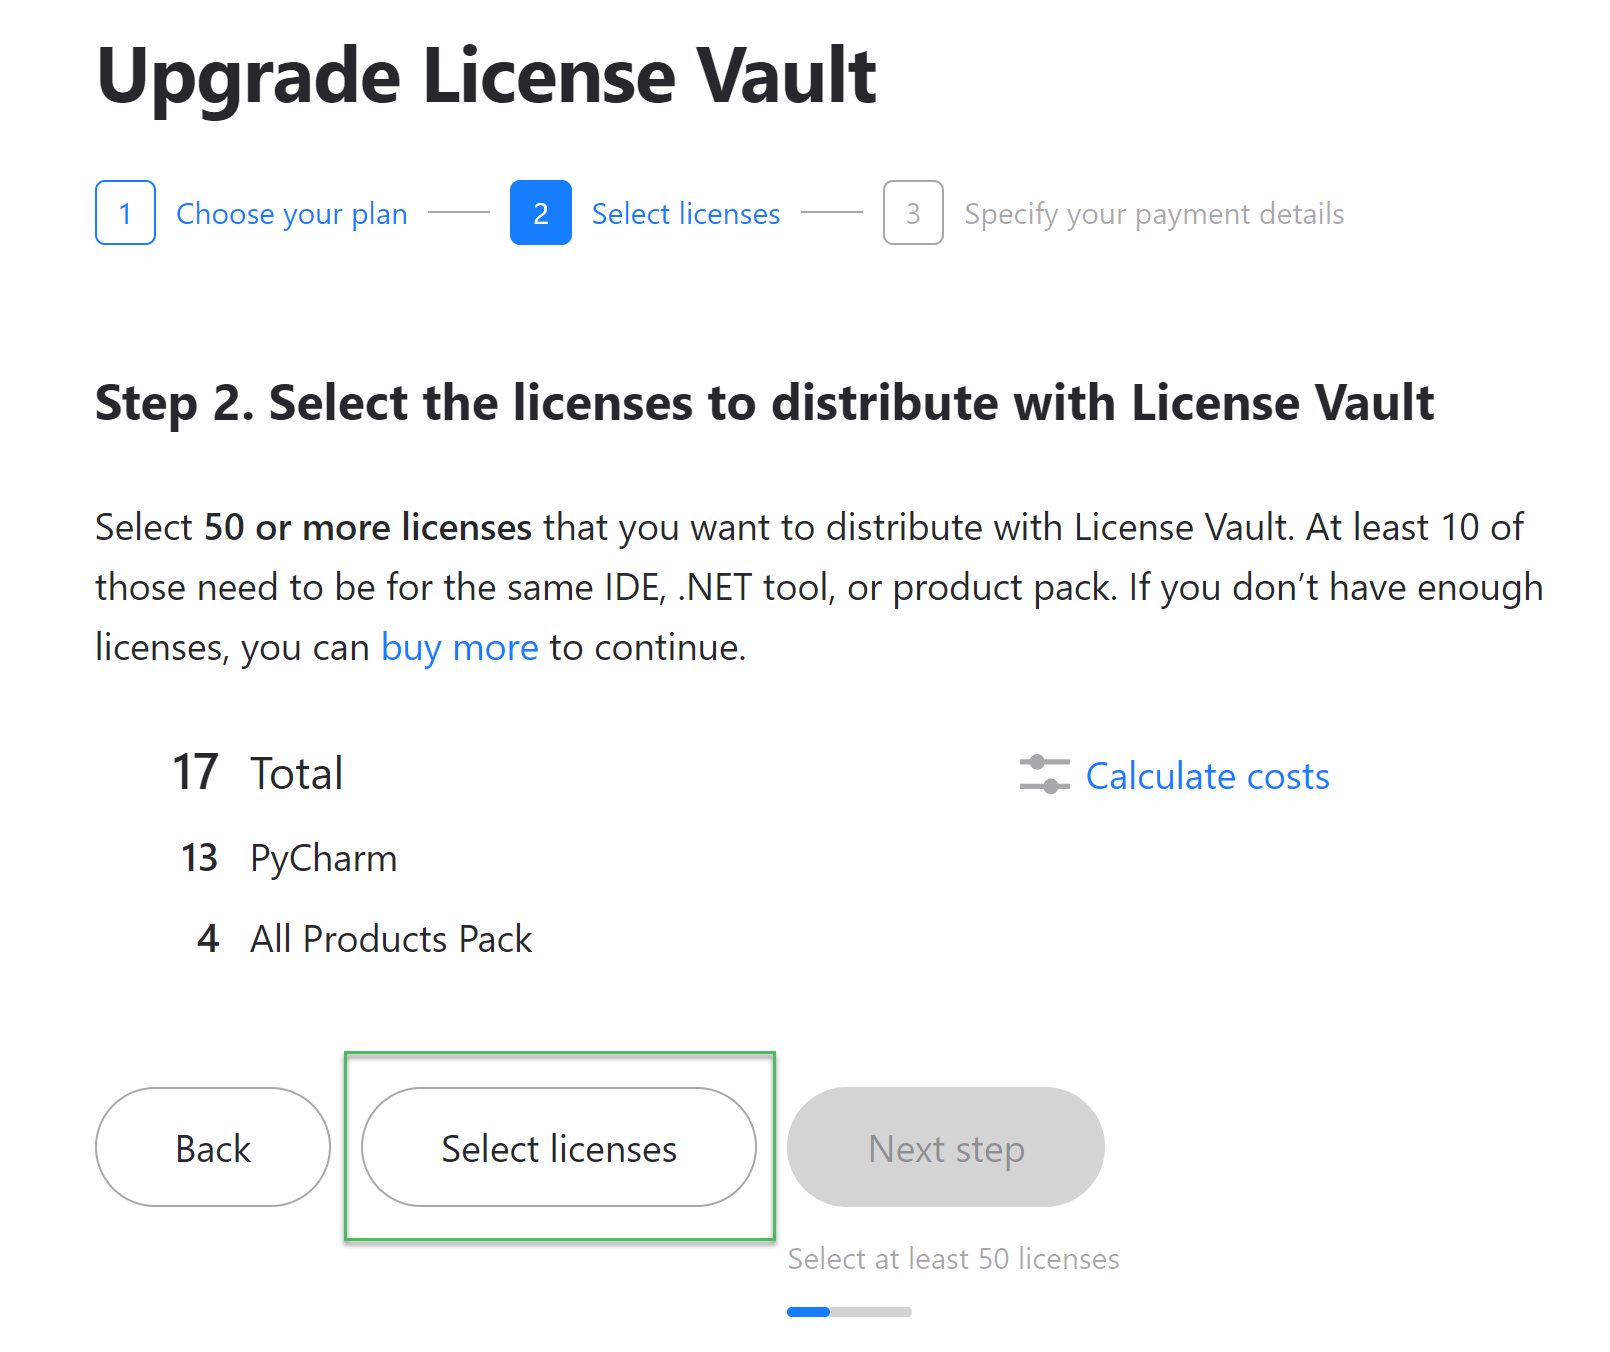 The button to select licenses to add to License Vault